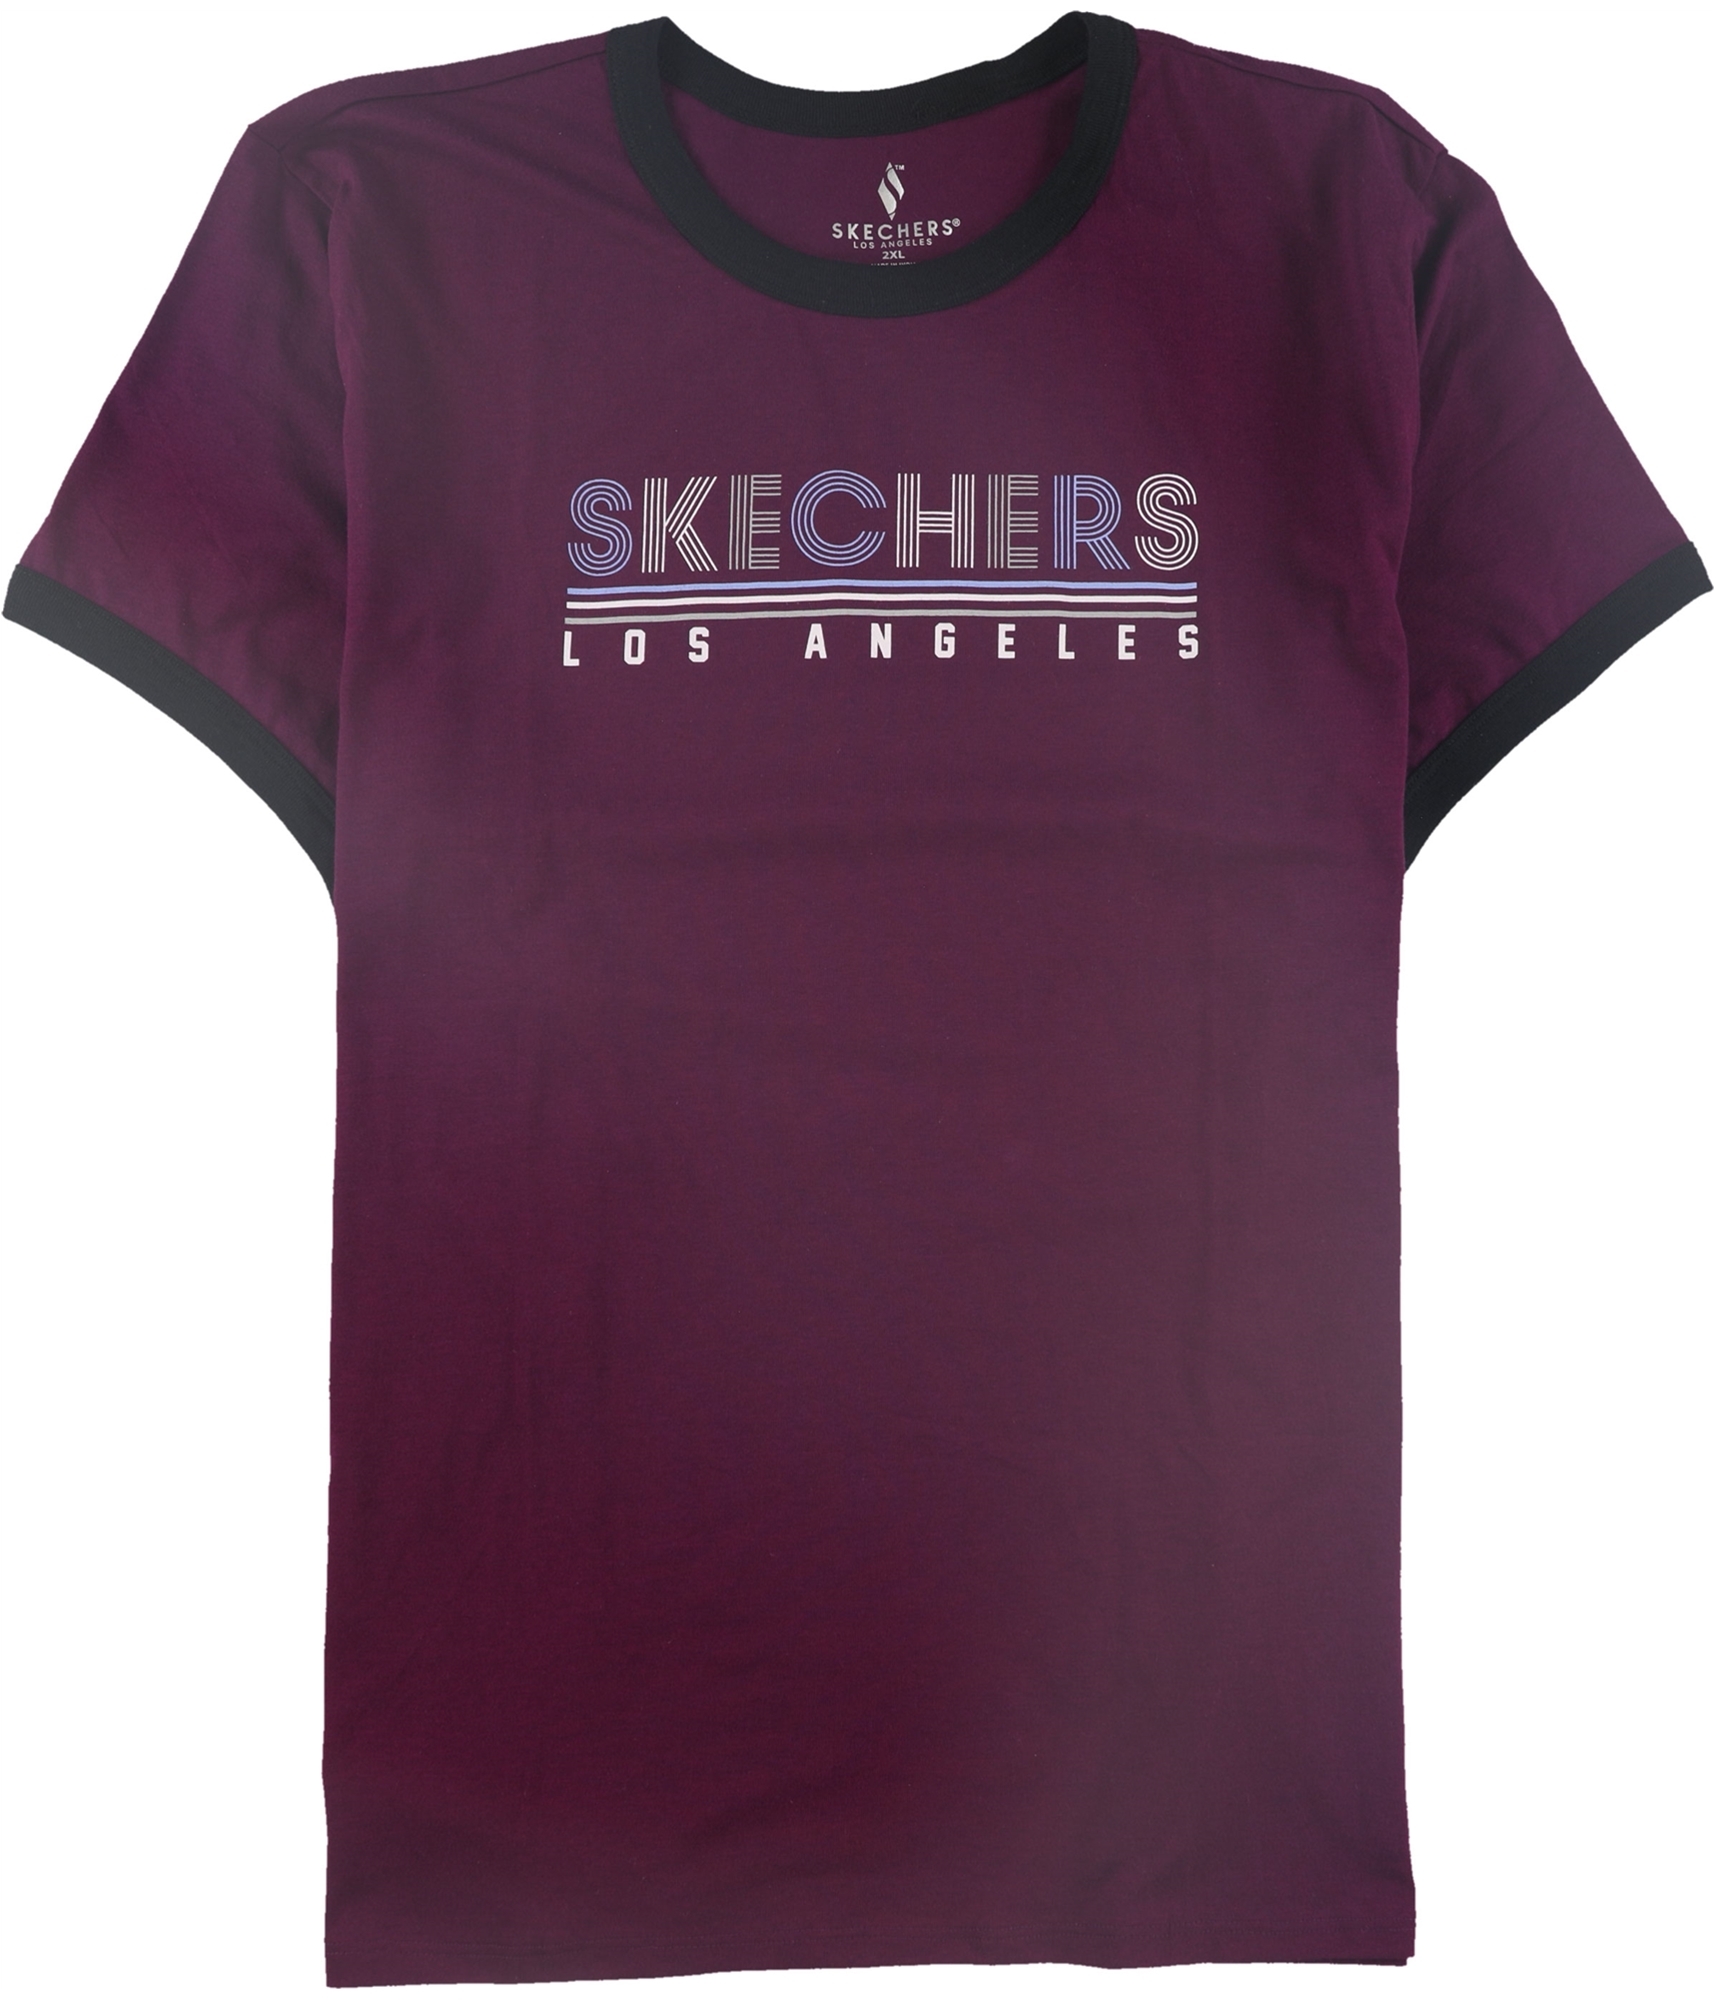 Los Angeles Skechers | Graphic Buy T-Shirt Tagsweekly a Womens